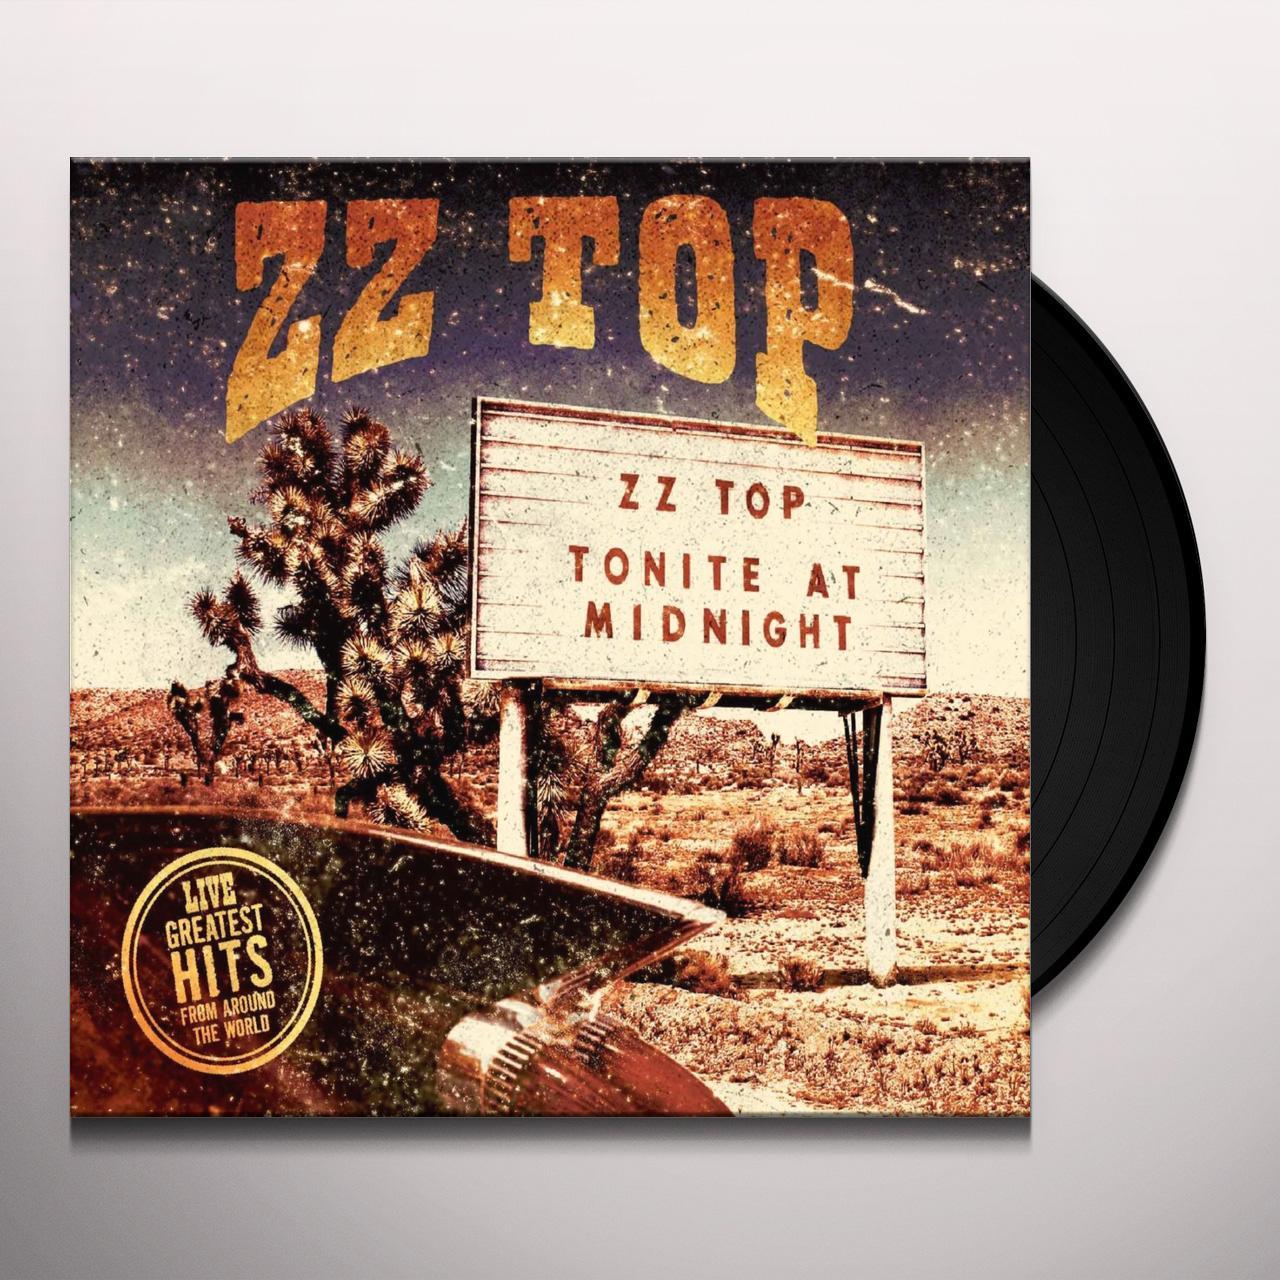 ZZ Top ‎– Live! Greatest Hits From Around The World